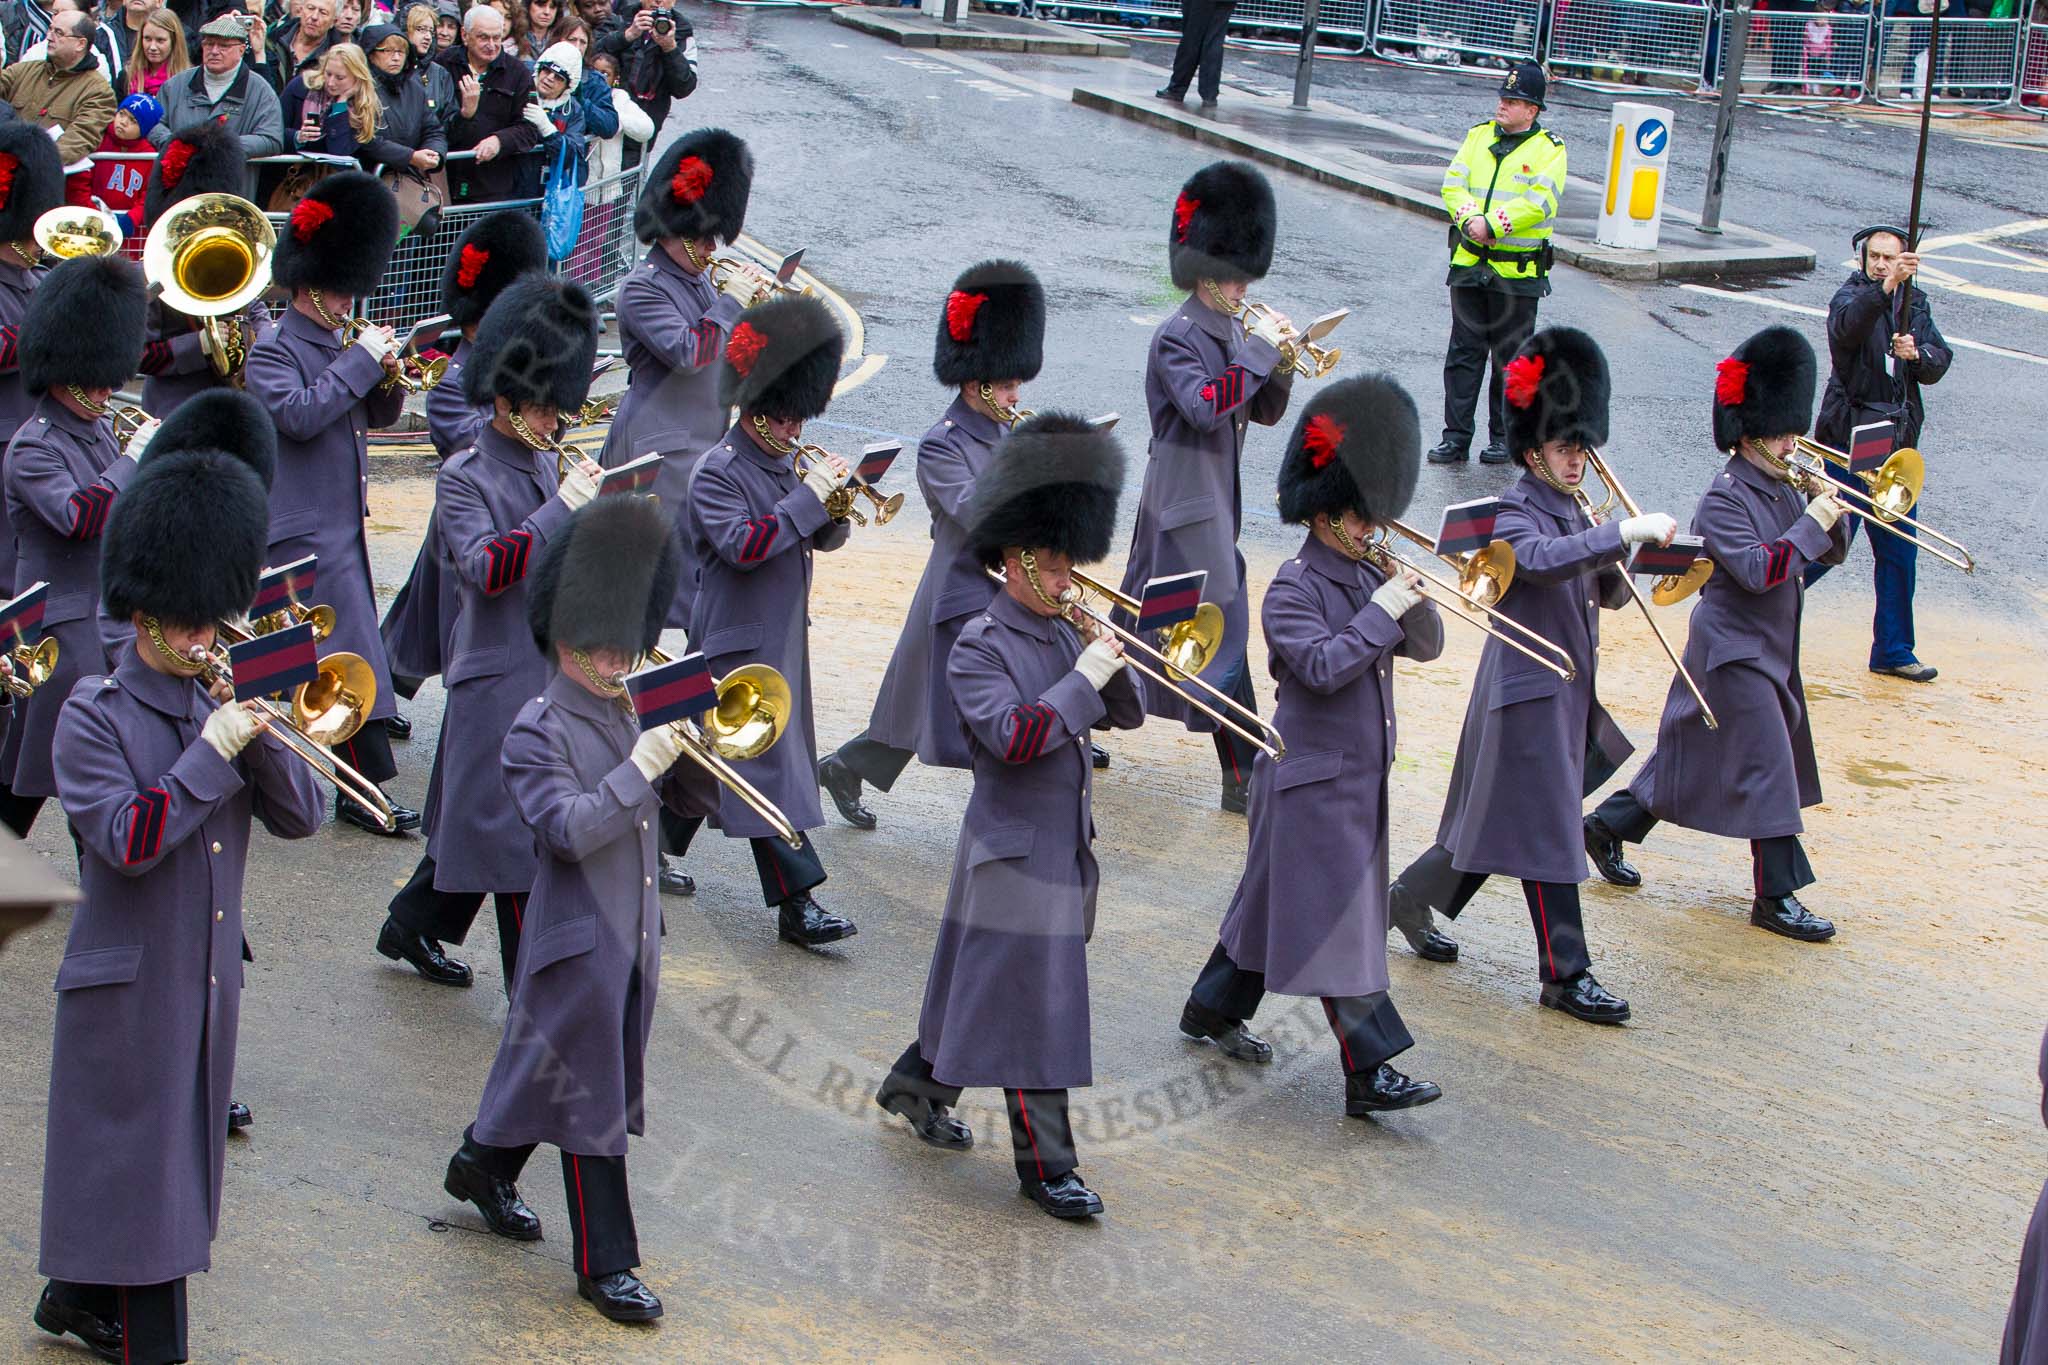 Lord Mayor's Show 2012: Entry 139 - The Band of the Coldstream Guards..
Press stand opposite Mansion House, City of London,
London,
Greater London,
United Kingdom,
on 10 November 2012 at 12:06, image #1884